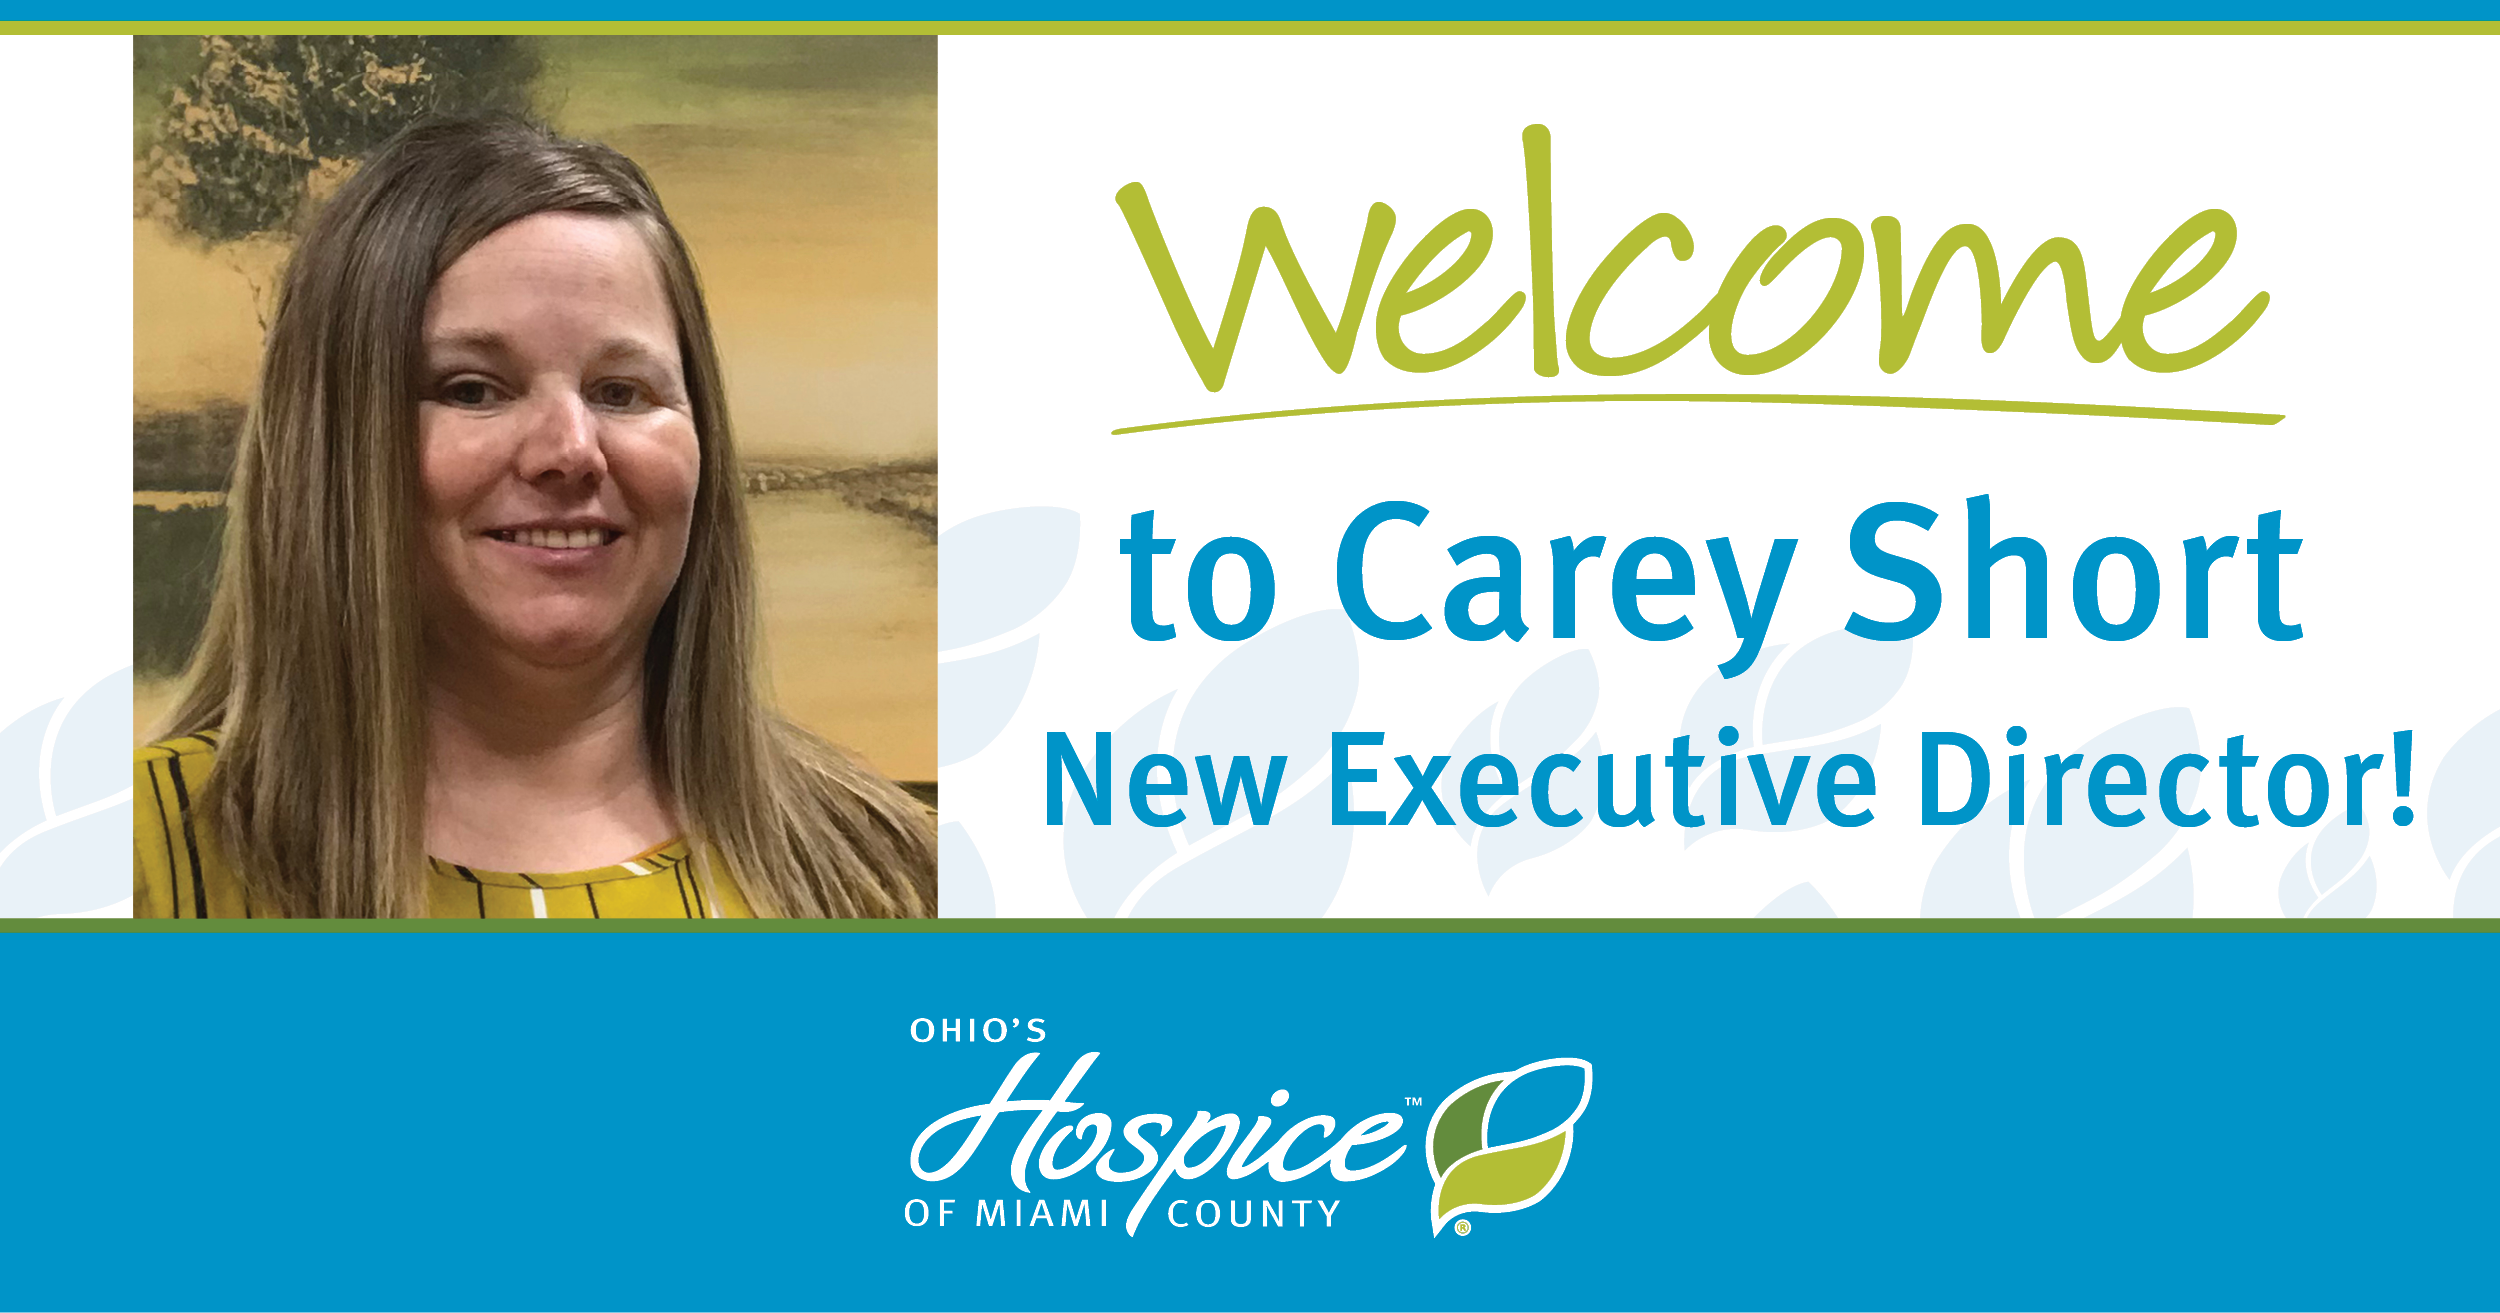 Welcome to Carey Short New Executive Director!